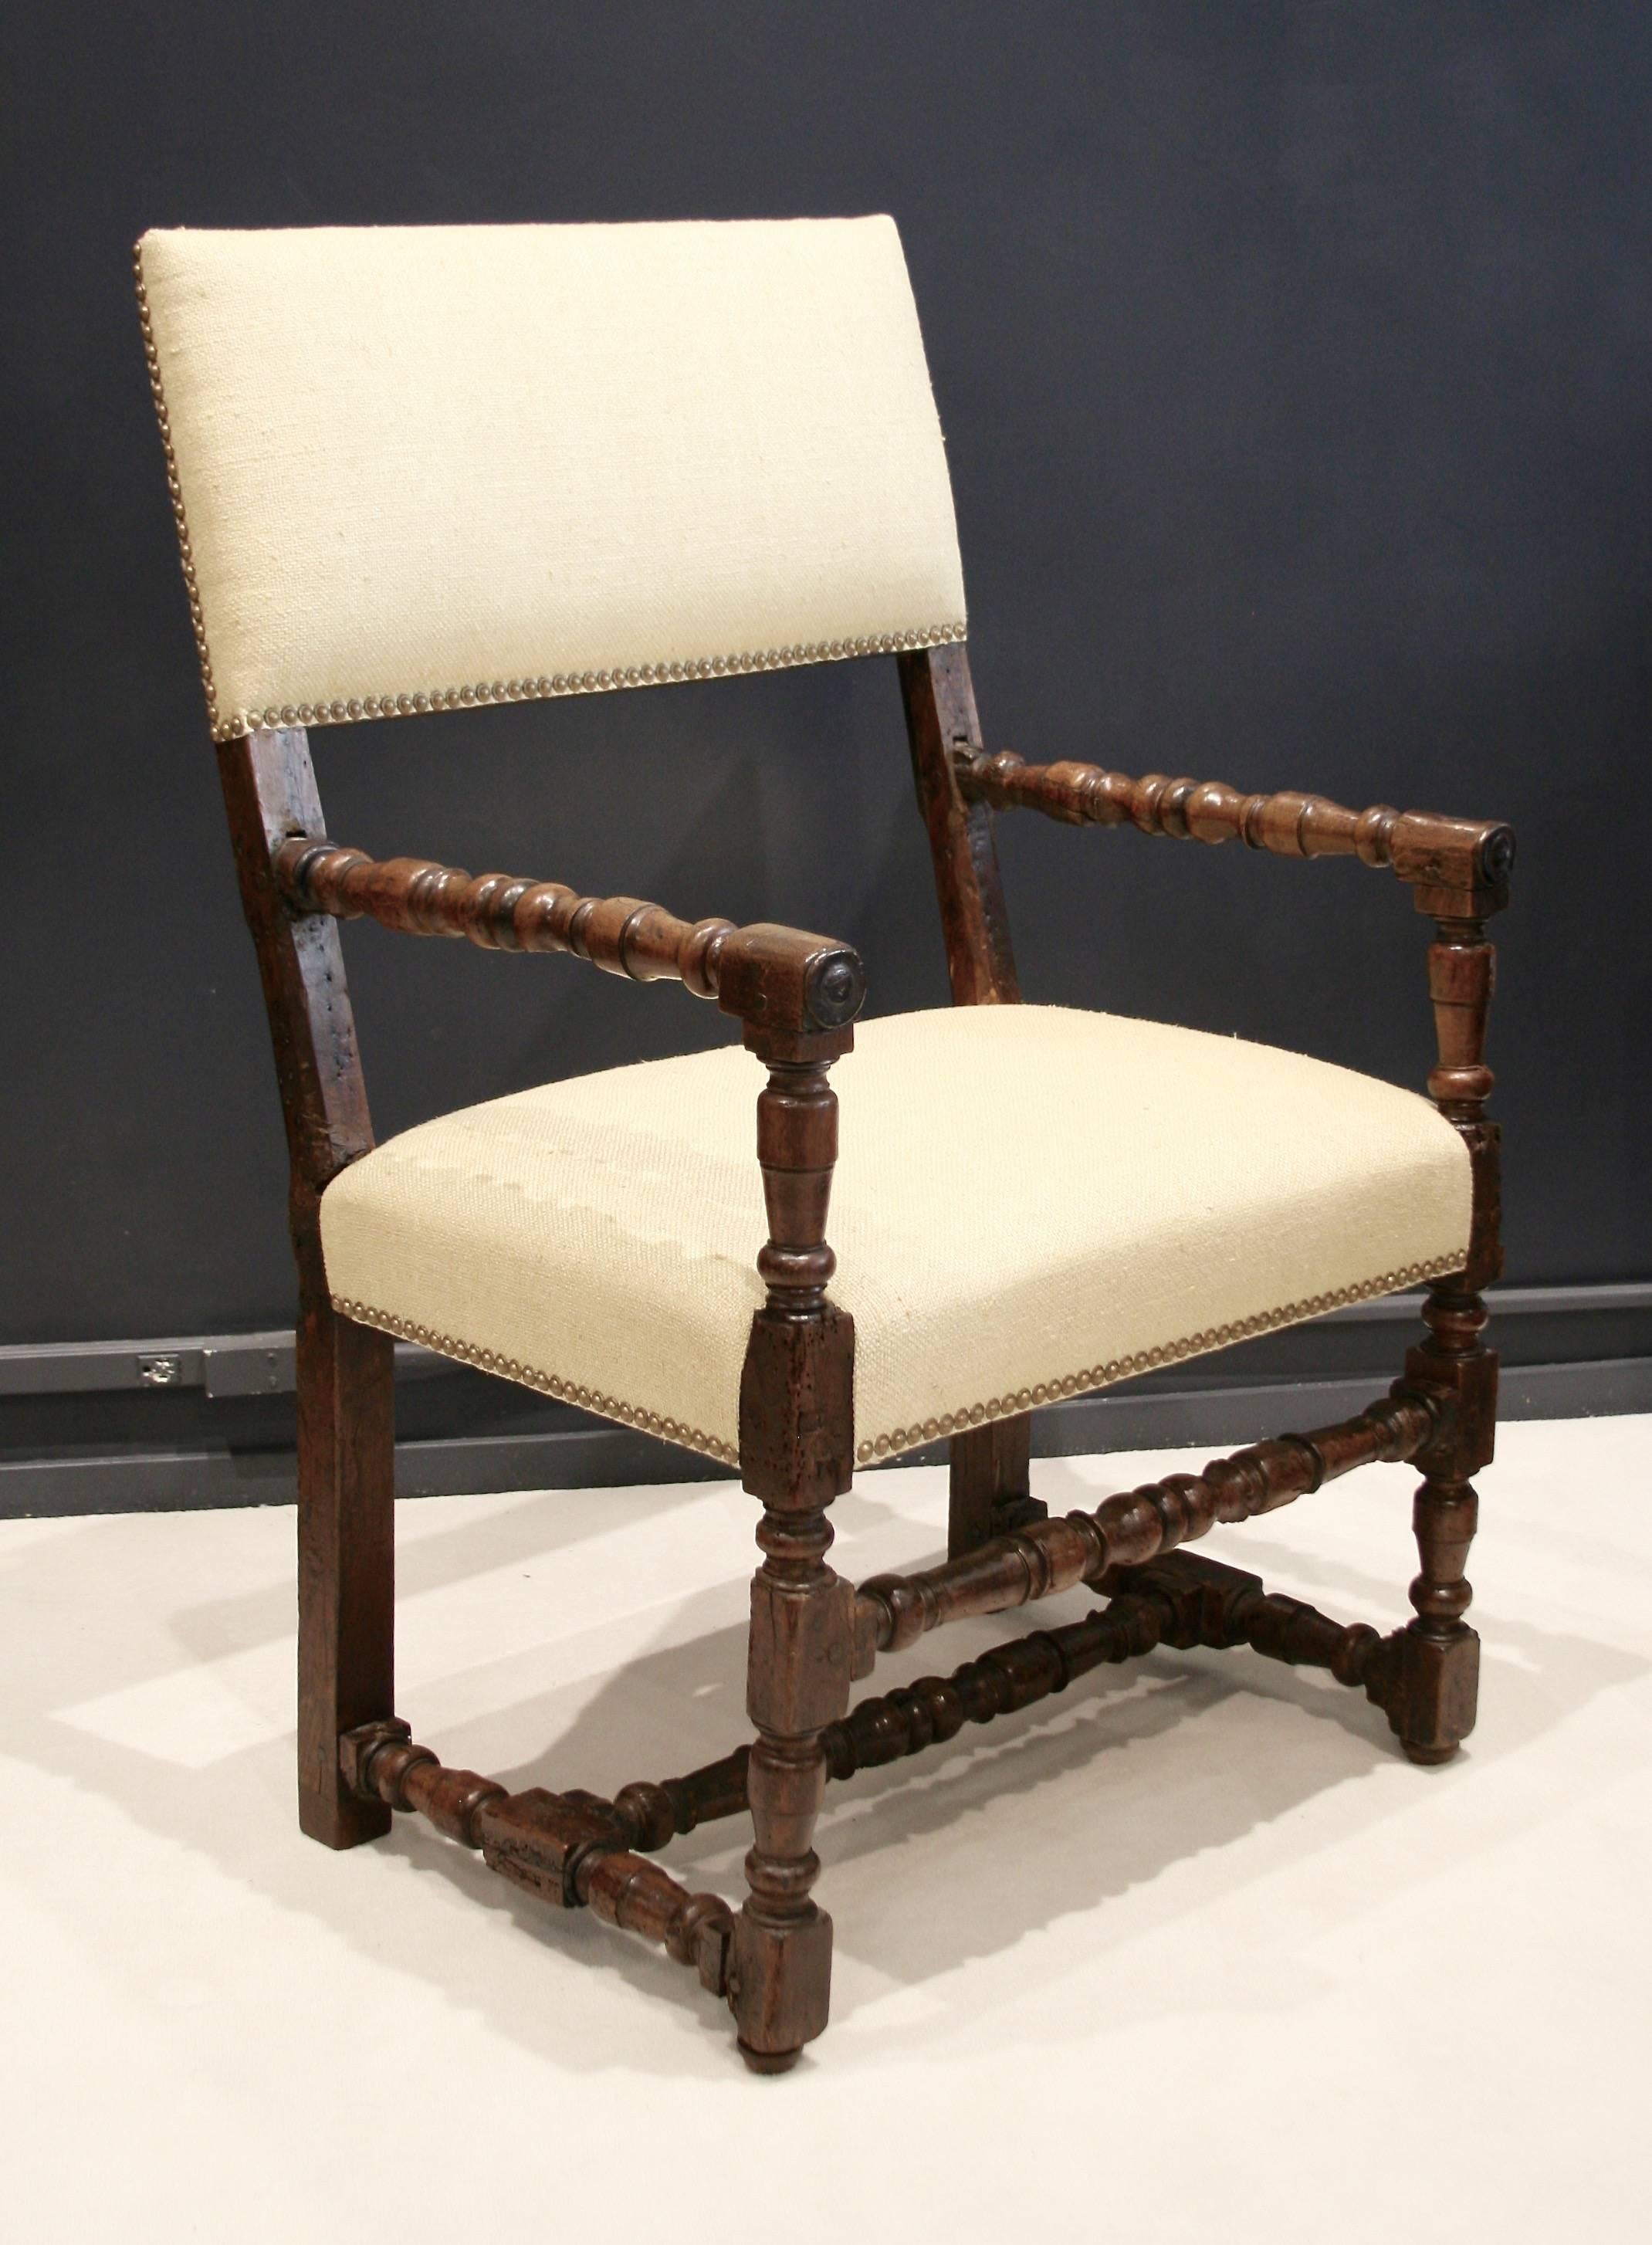 A pair of very rare Flemish early 17th century armchairs. Padded back
and seat (restored) covered with a hopsack weave raw silk in pale cream
color and finished with antique brass nailhead trim.
The chairs have experienced some wurming which